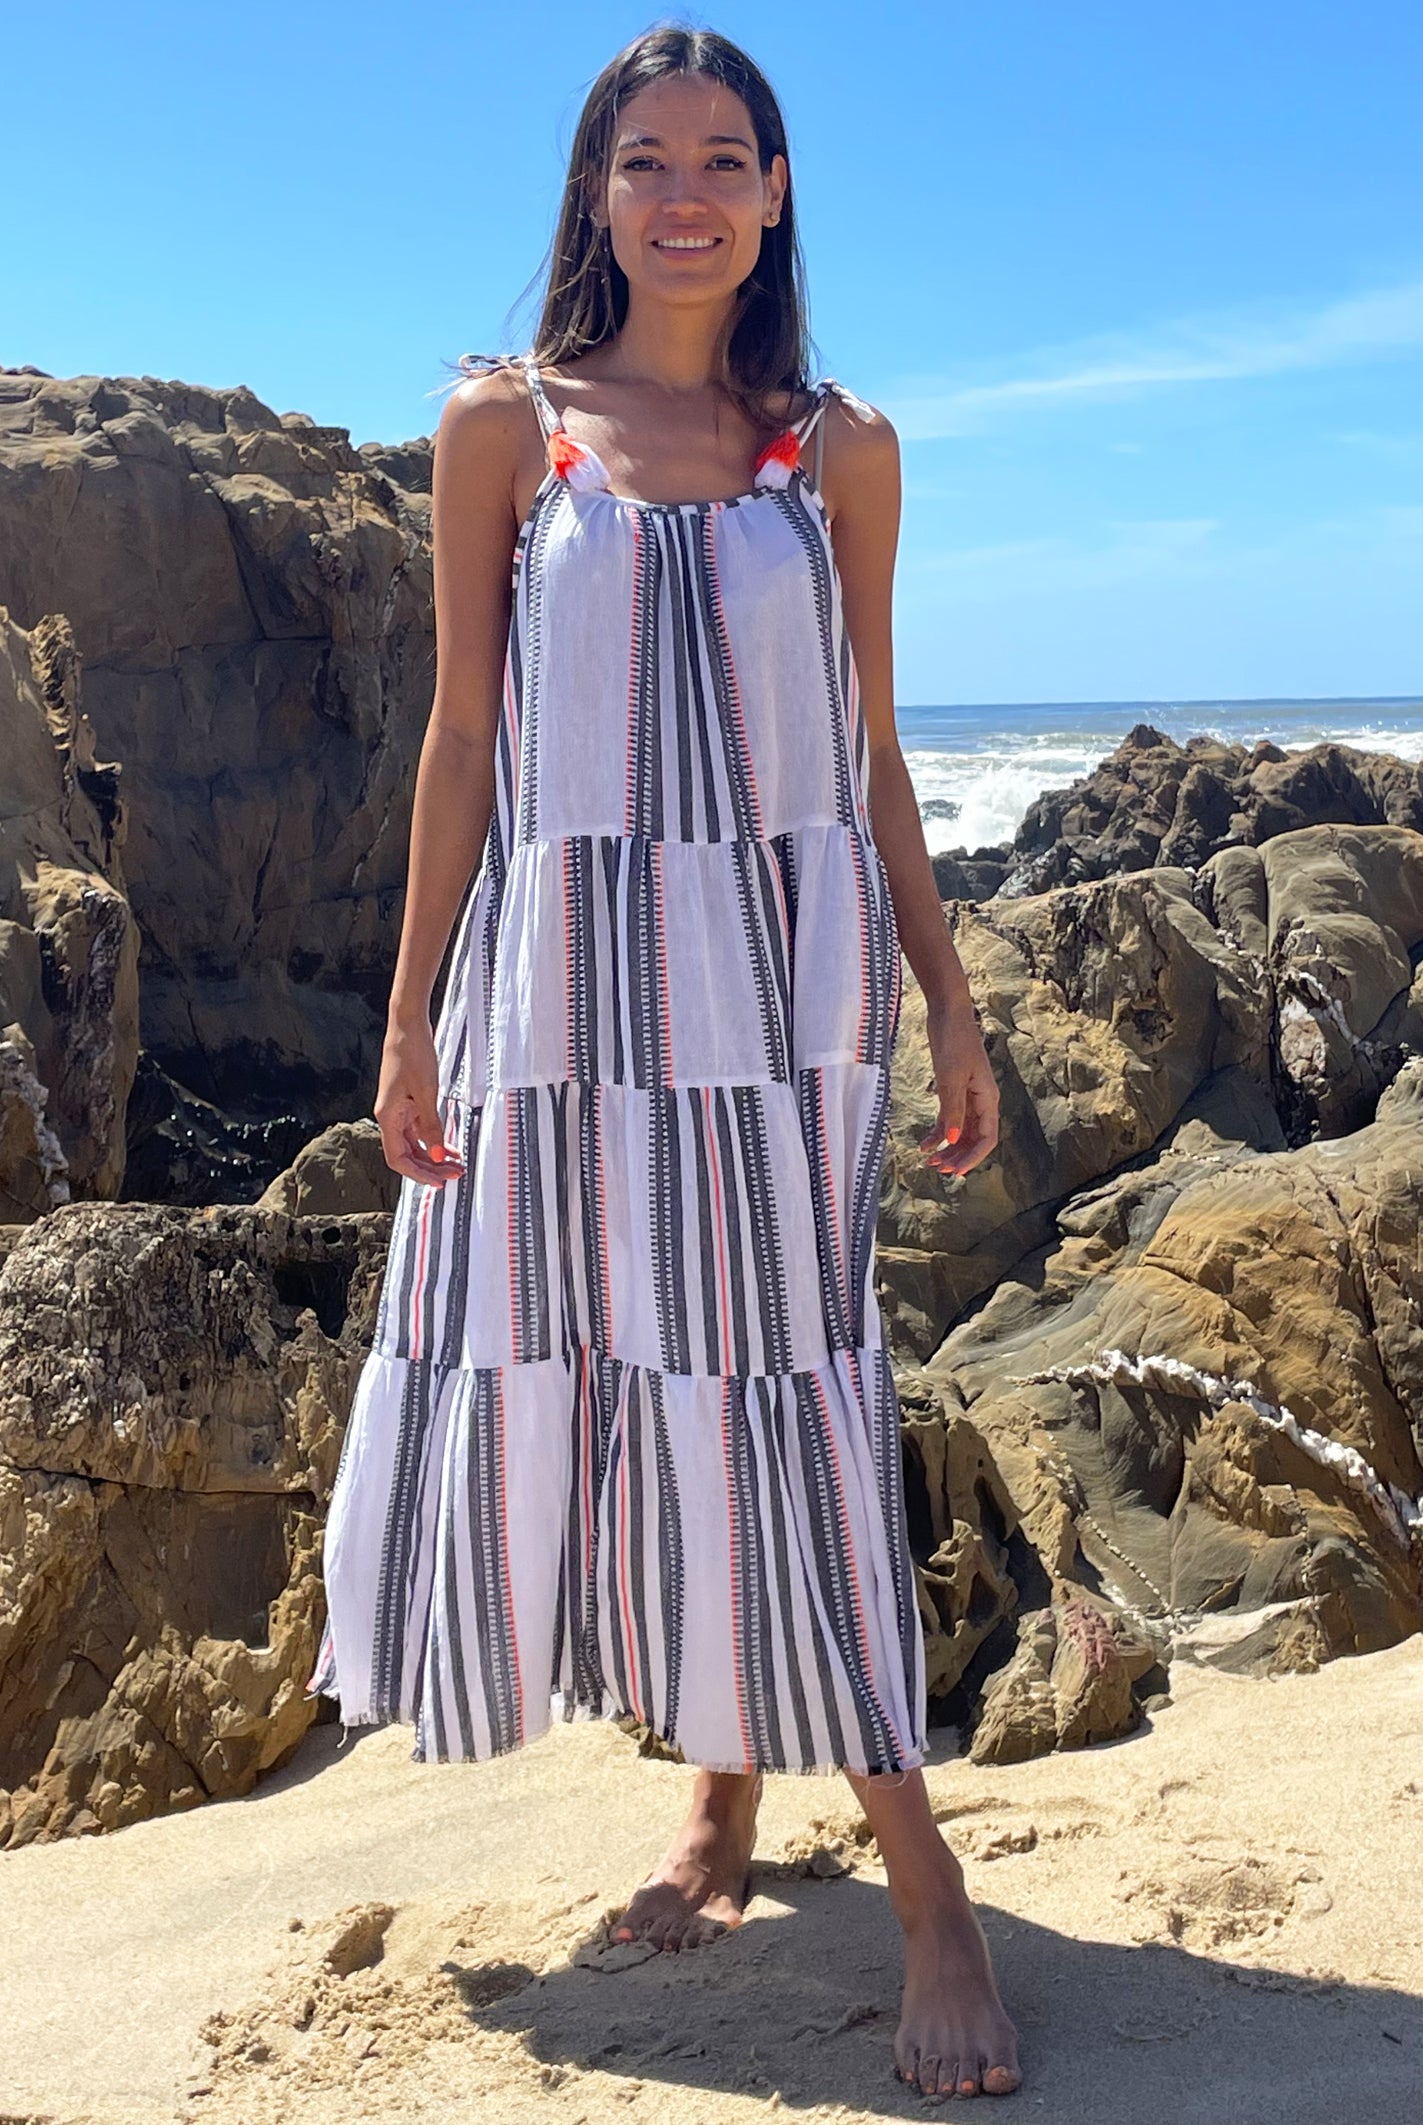 A model stood on a beach wearing a Rosebud by Rose and Rose Bias Dress.